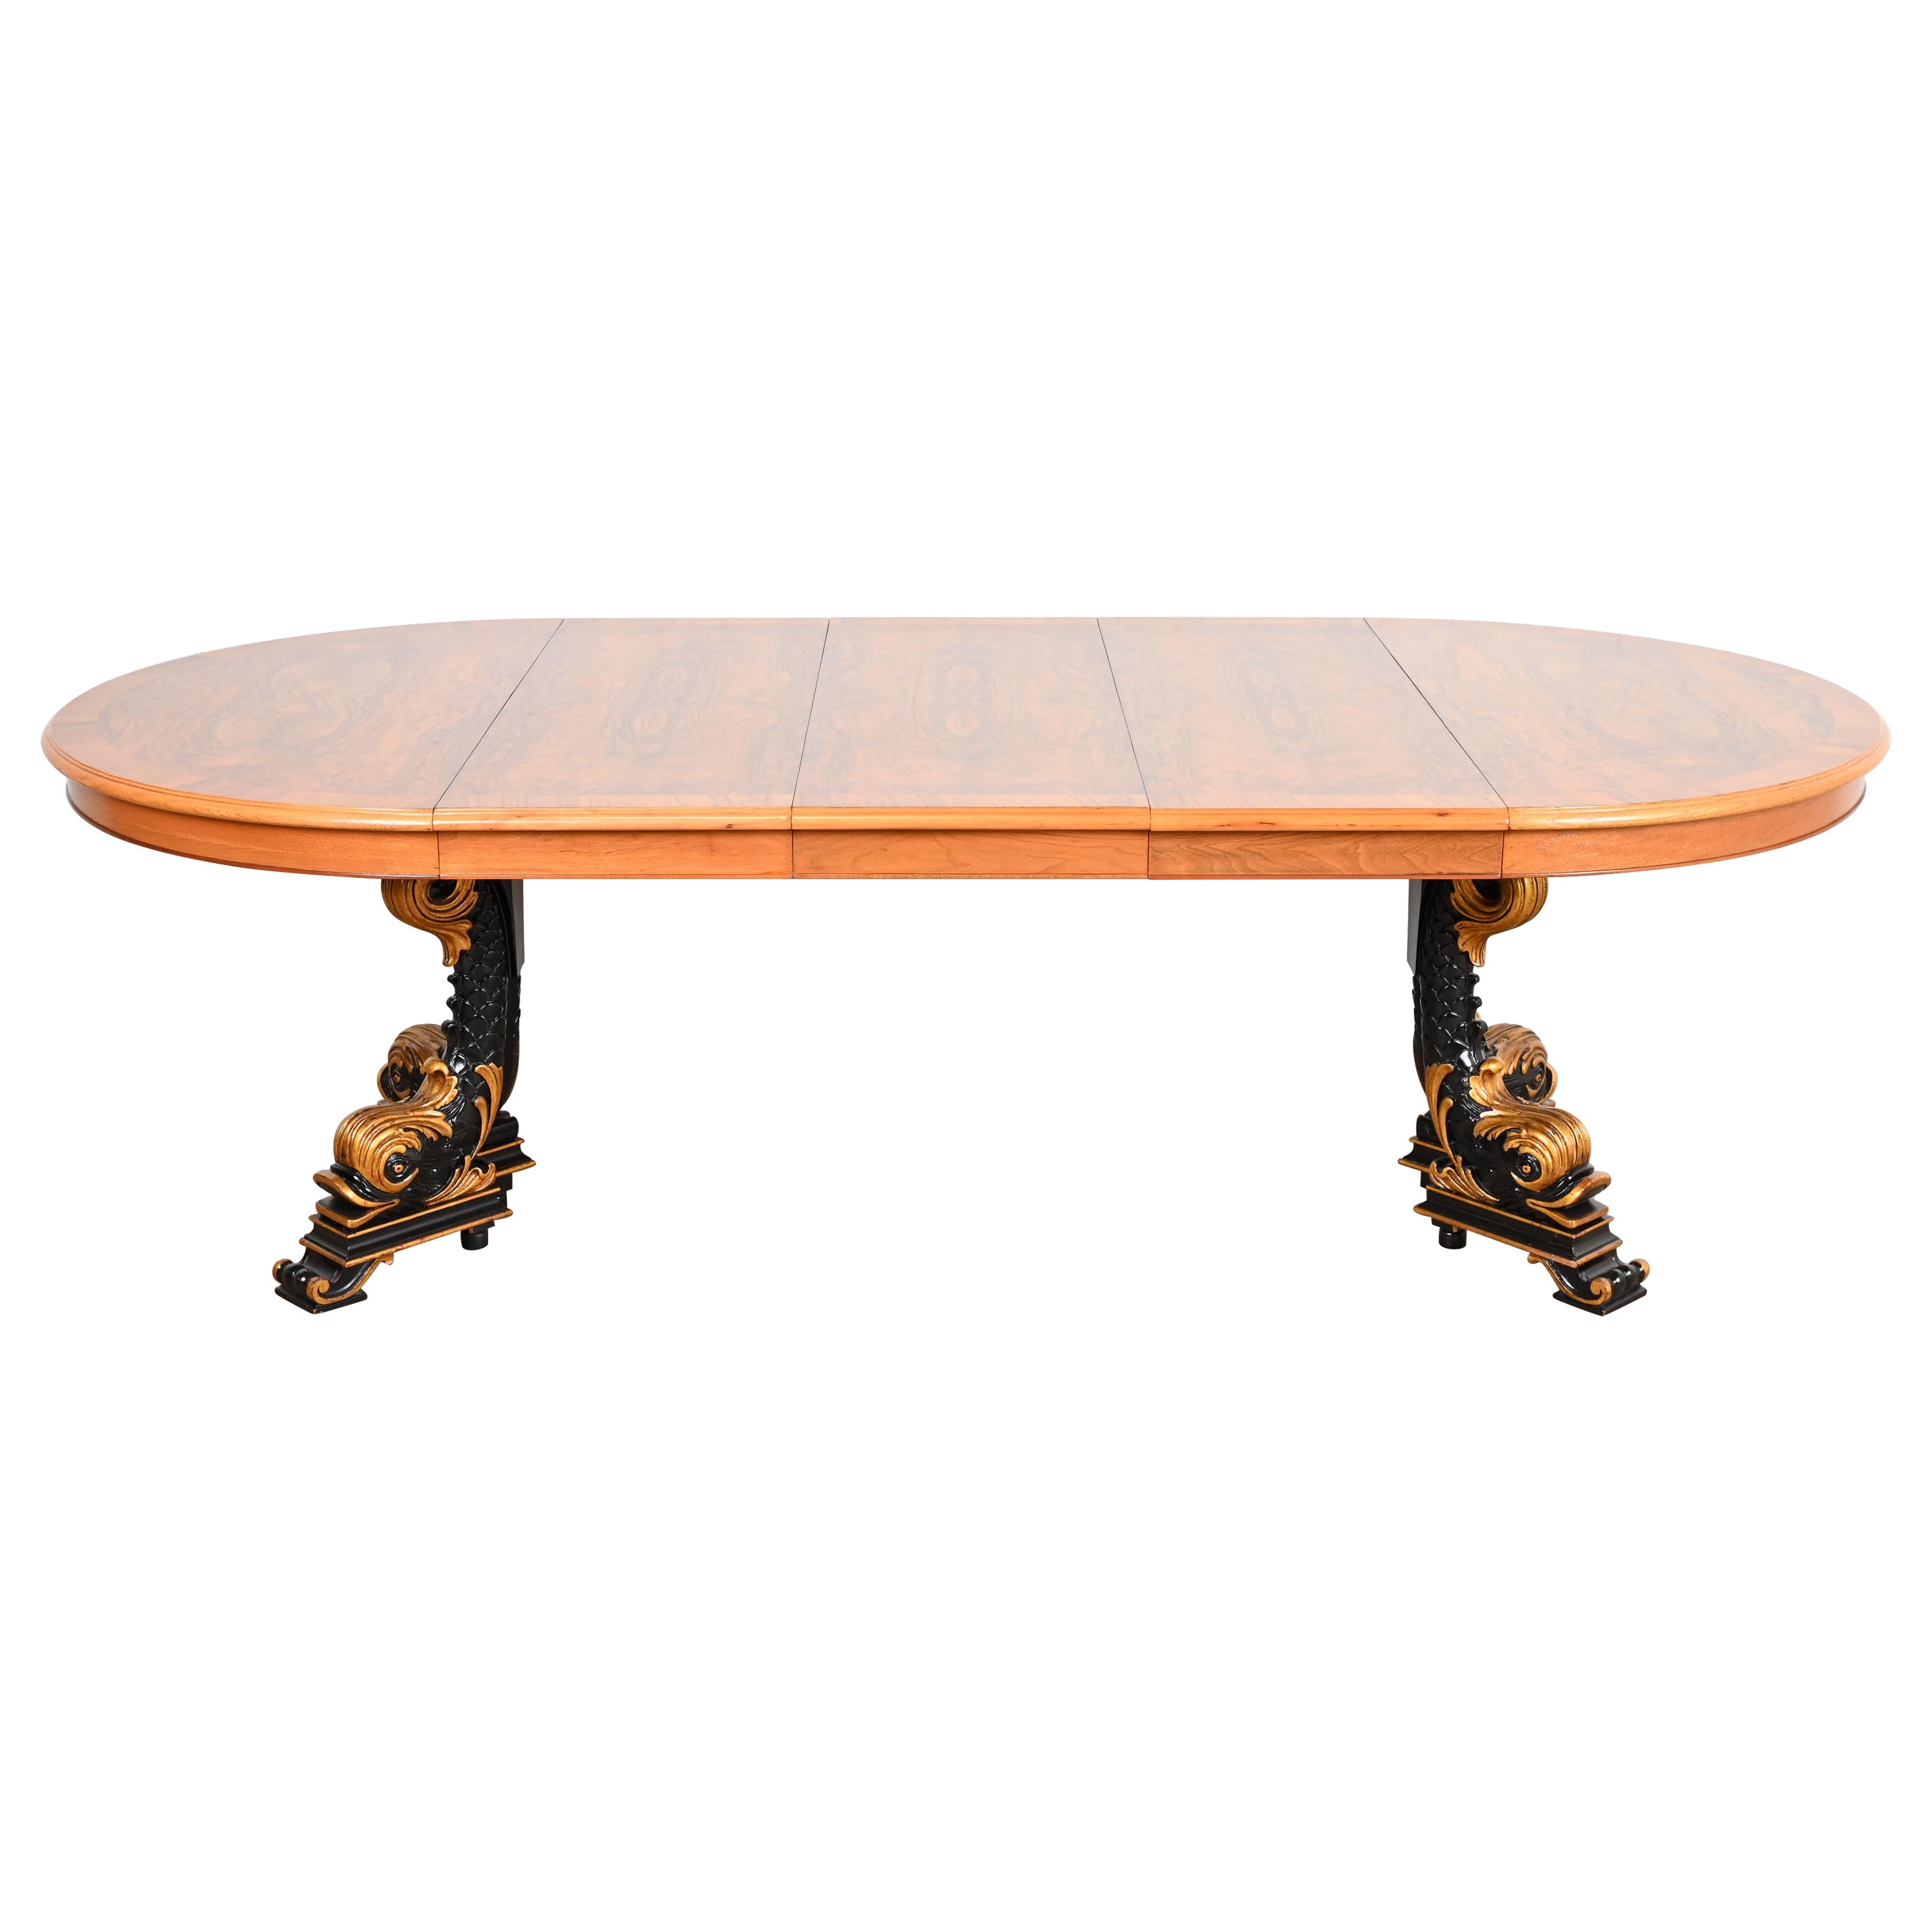 Karges Regency Burled Walnut Dolphin Base Extension Dining Table, Newly Restored